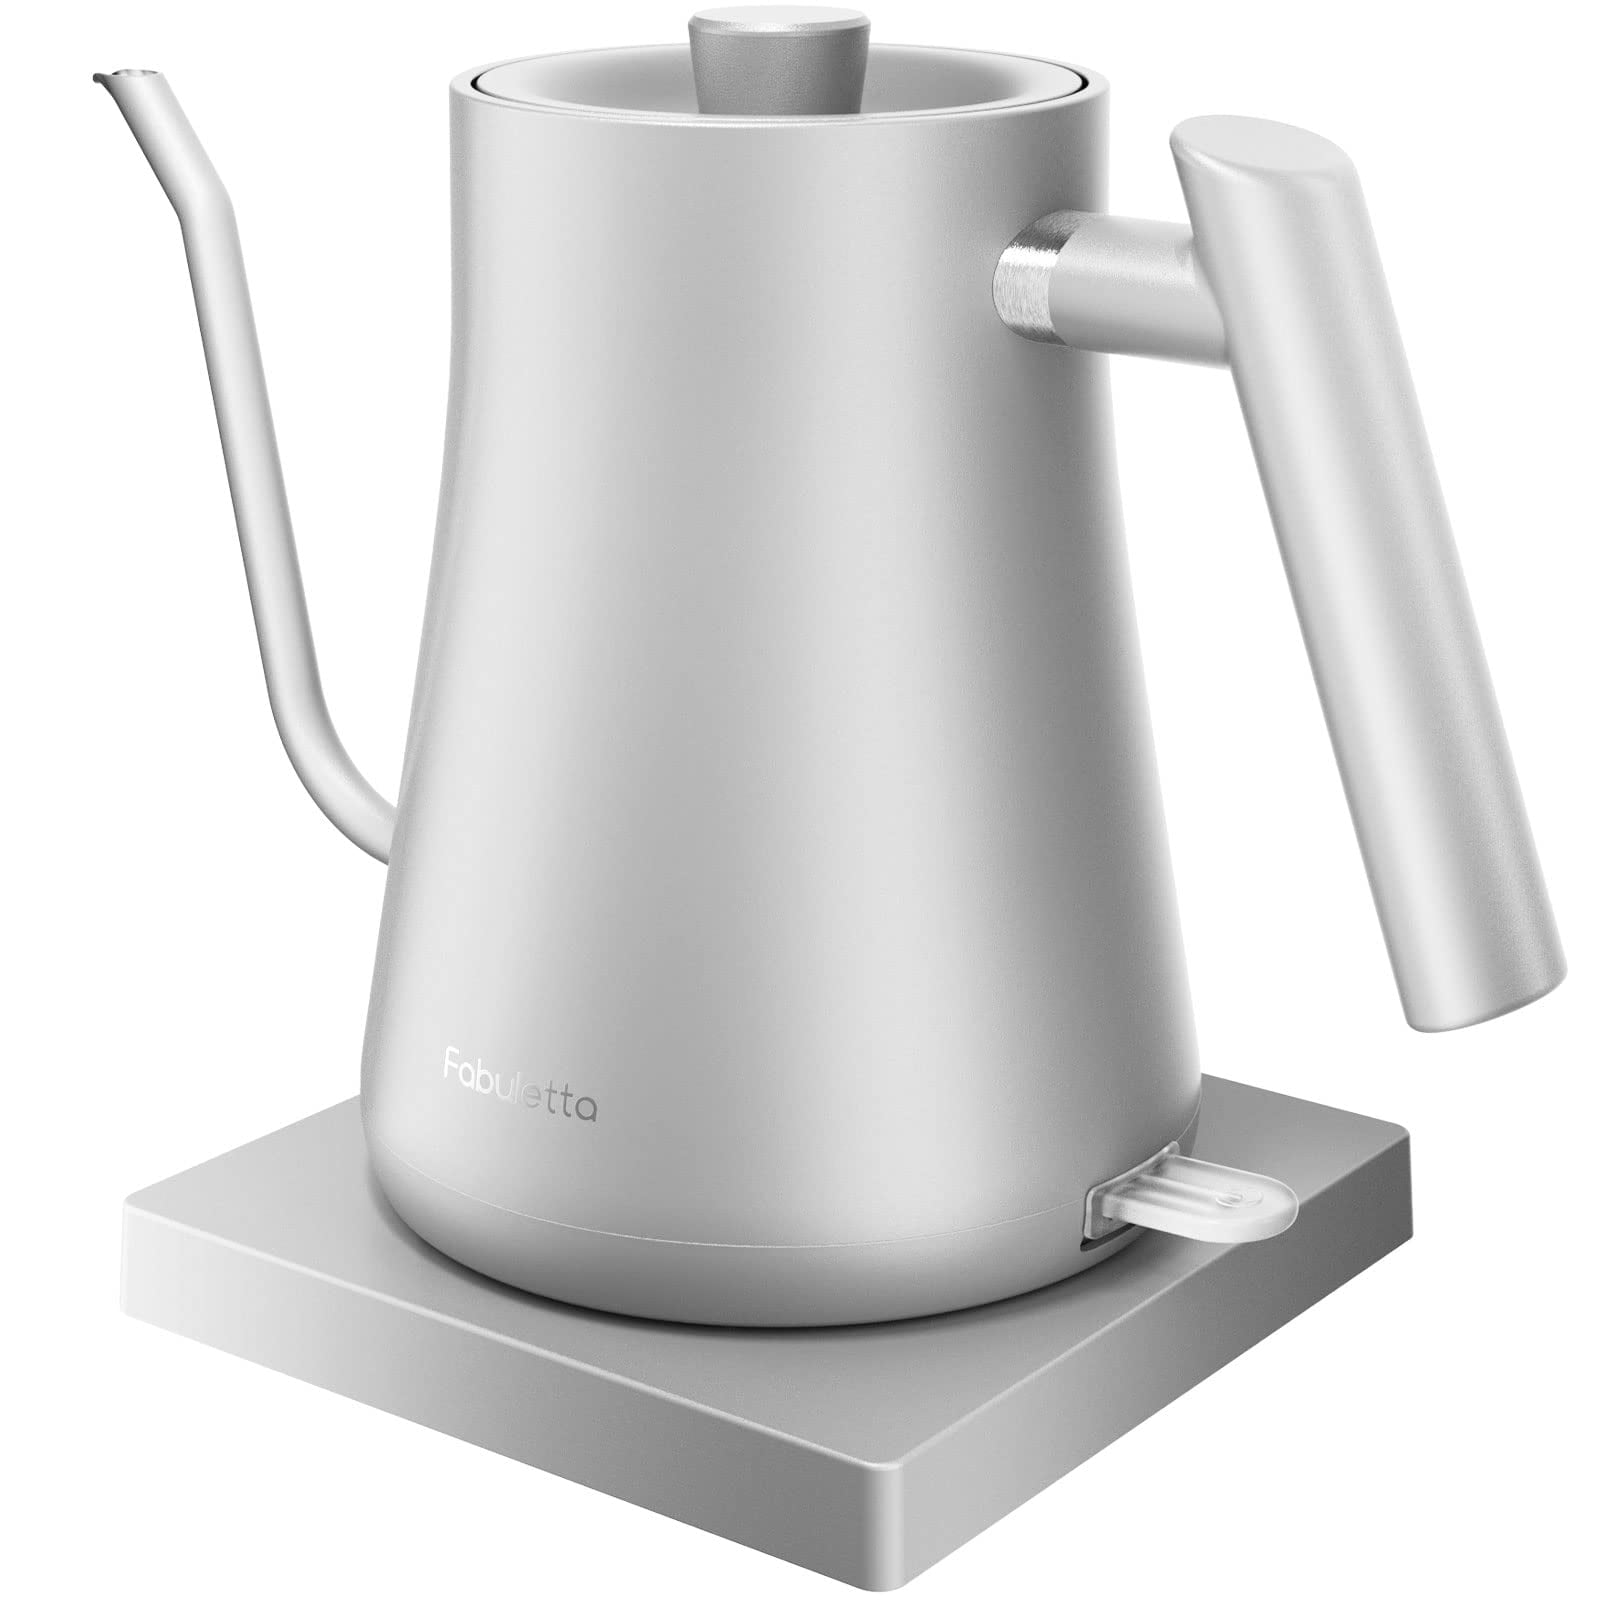 ECORELAX Gooseneck Electric Kettle, Pour Over Coffee and Tea Kettle, 100%  Stainless Steel Inner with Leak Proof Design, 1200W Rapid Heating, Strix